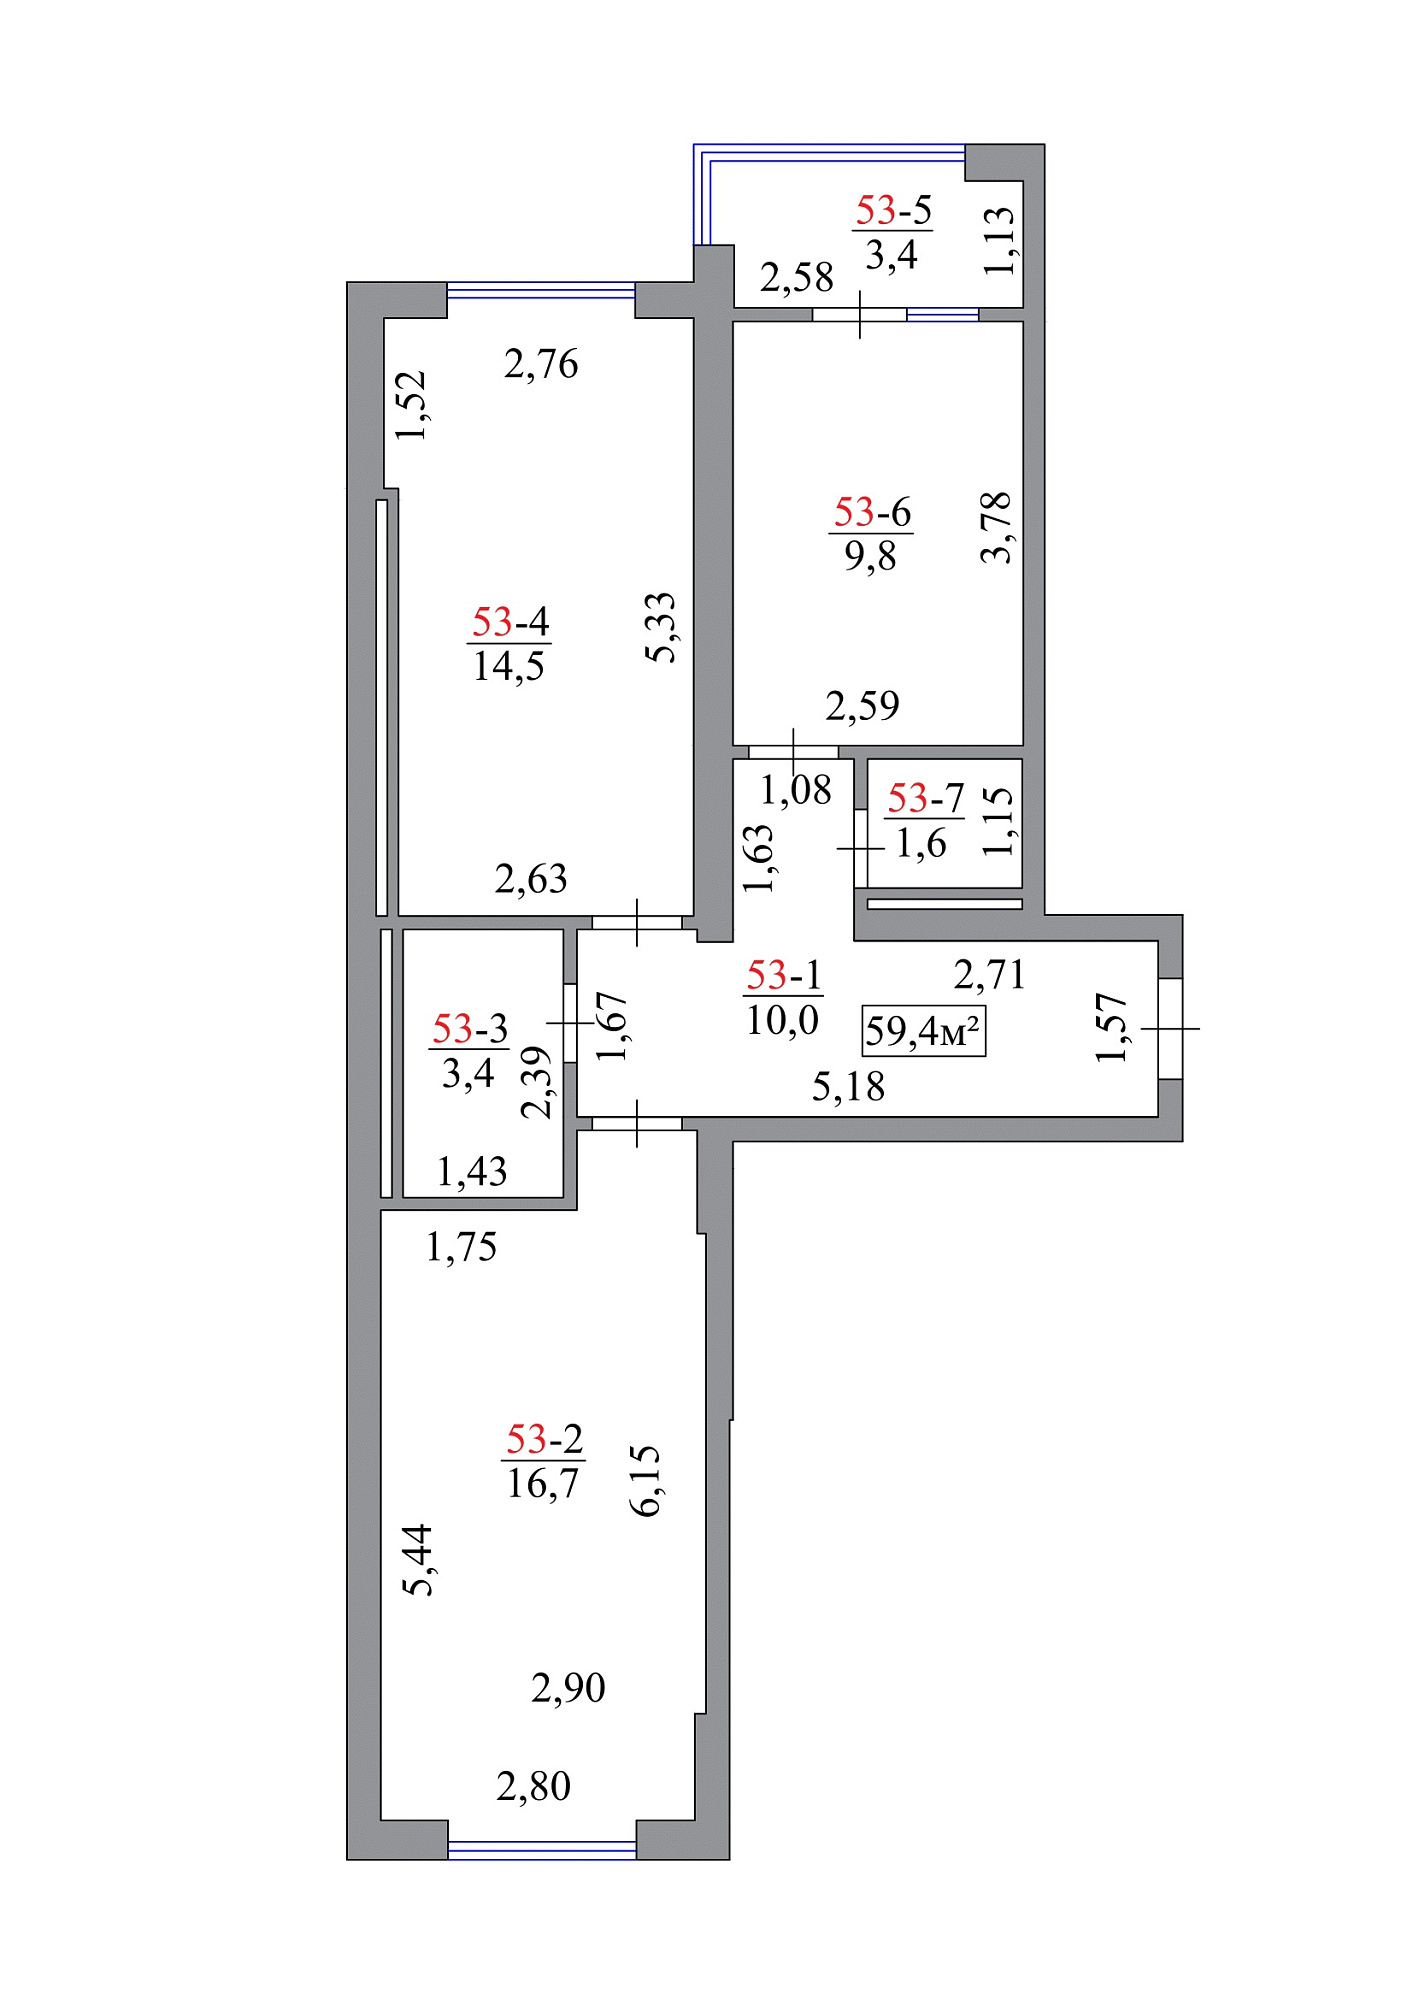 Planning 2-rm flats area 59.4m2, AB-07-06/00048.